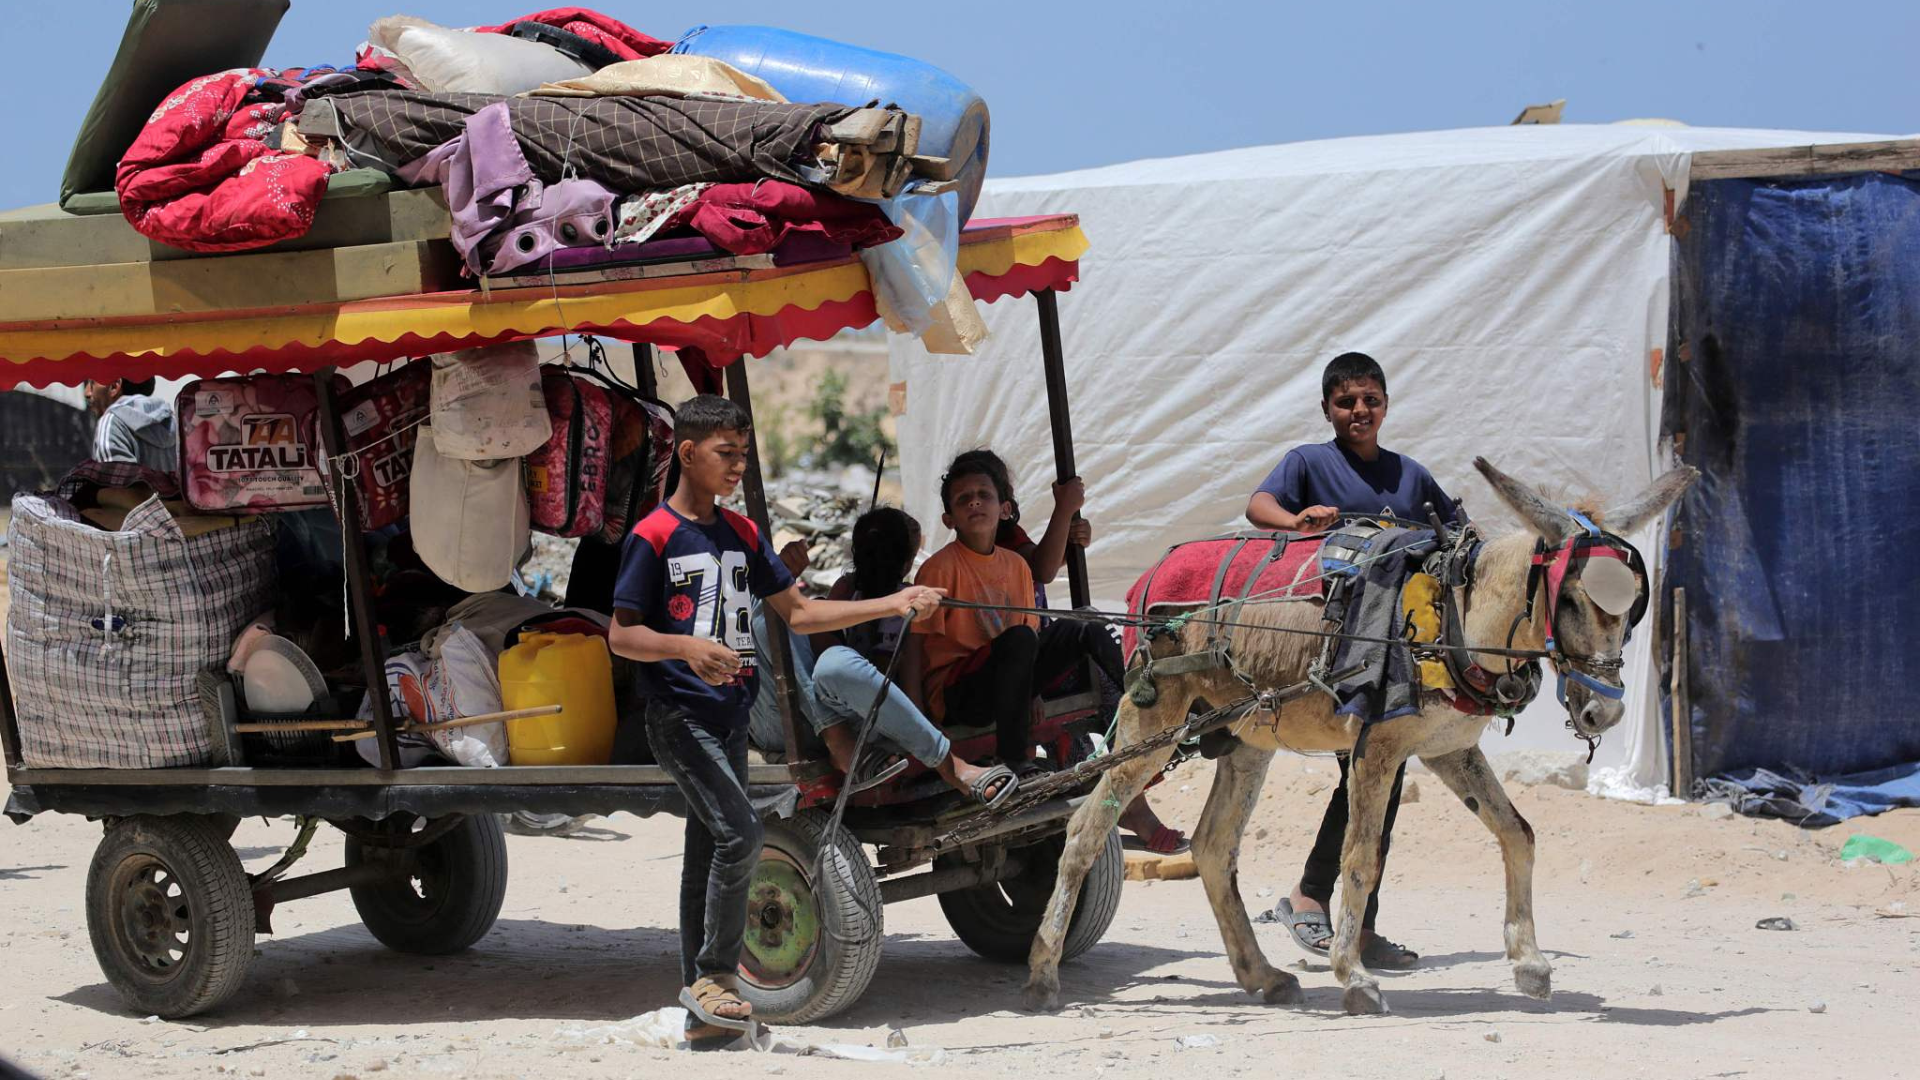 Palestinian children who fled Rafah transport their family's belongings in the back of a donkey-pulled cart as they arrive to take shelter. /CFP